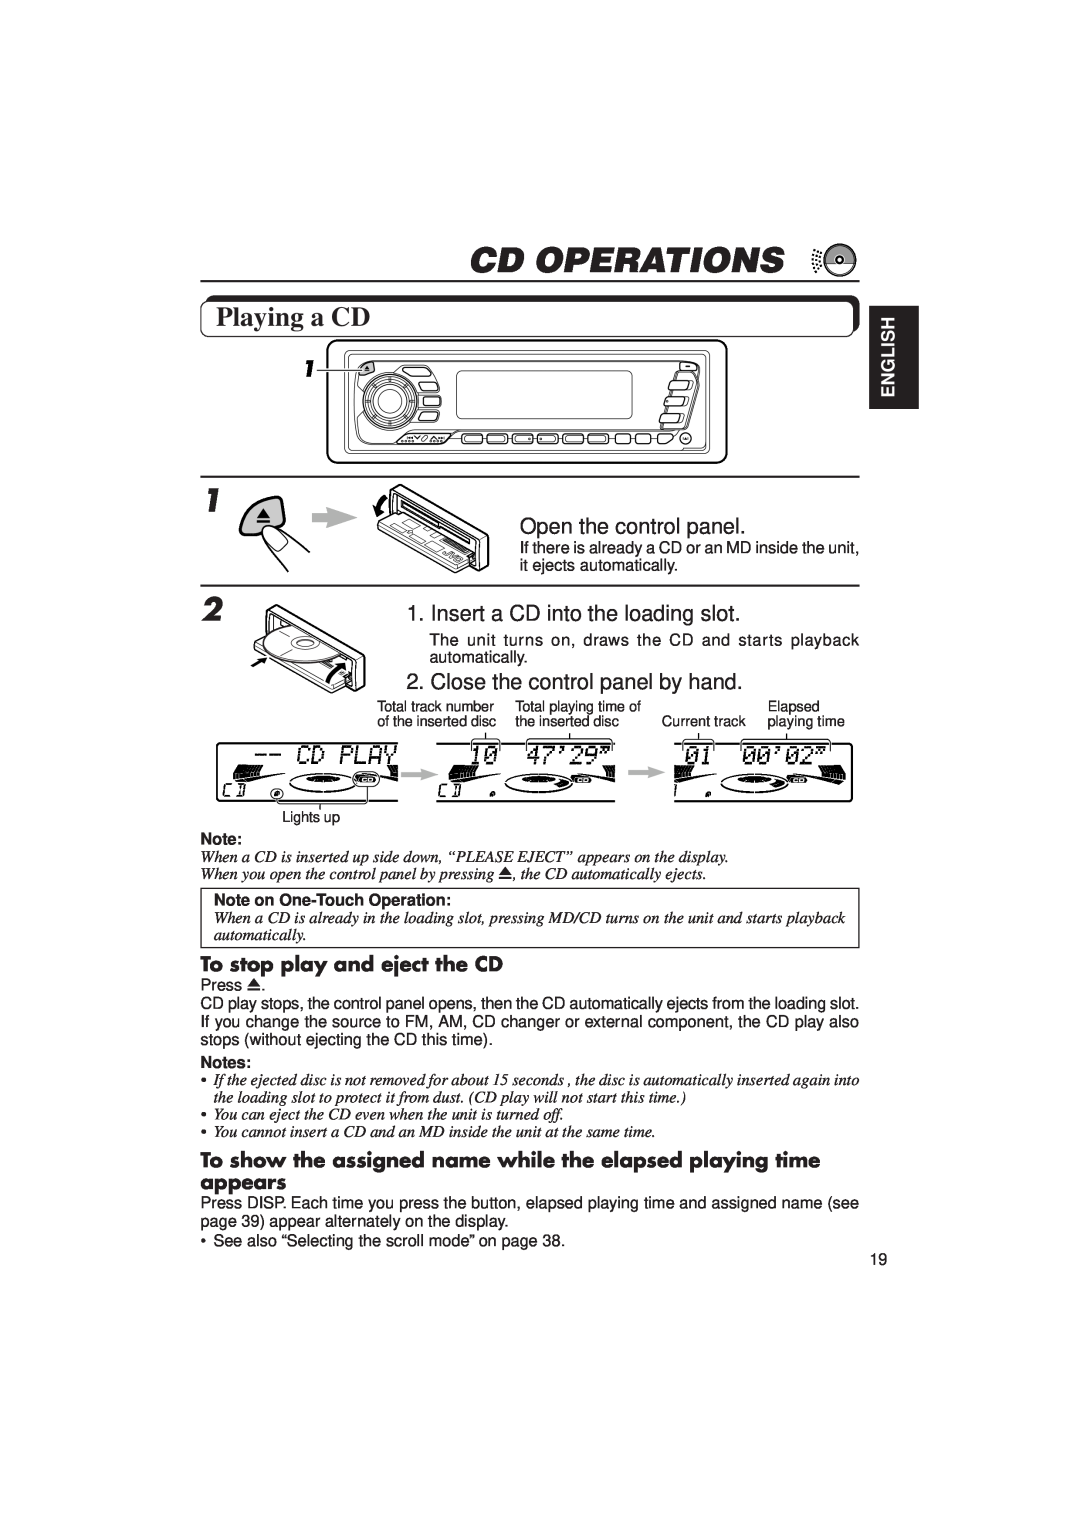 JVC KD-MX2900R manual Cd Operations, Playing a CD, To stop play and eject the CD, English, Note on One-TouchOperation 